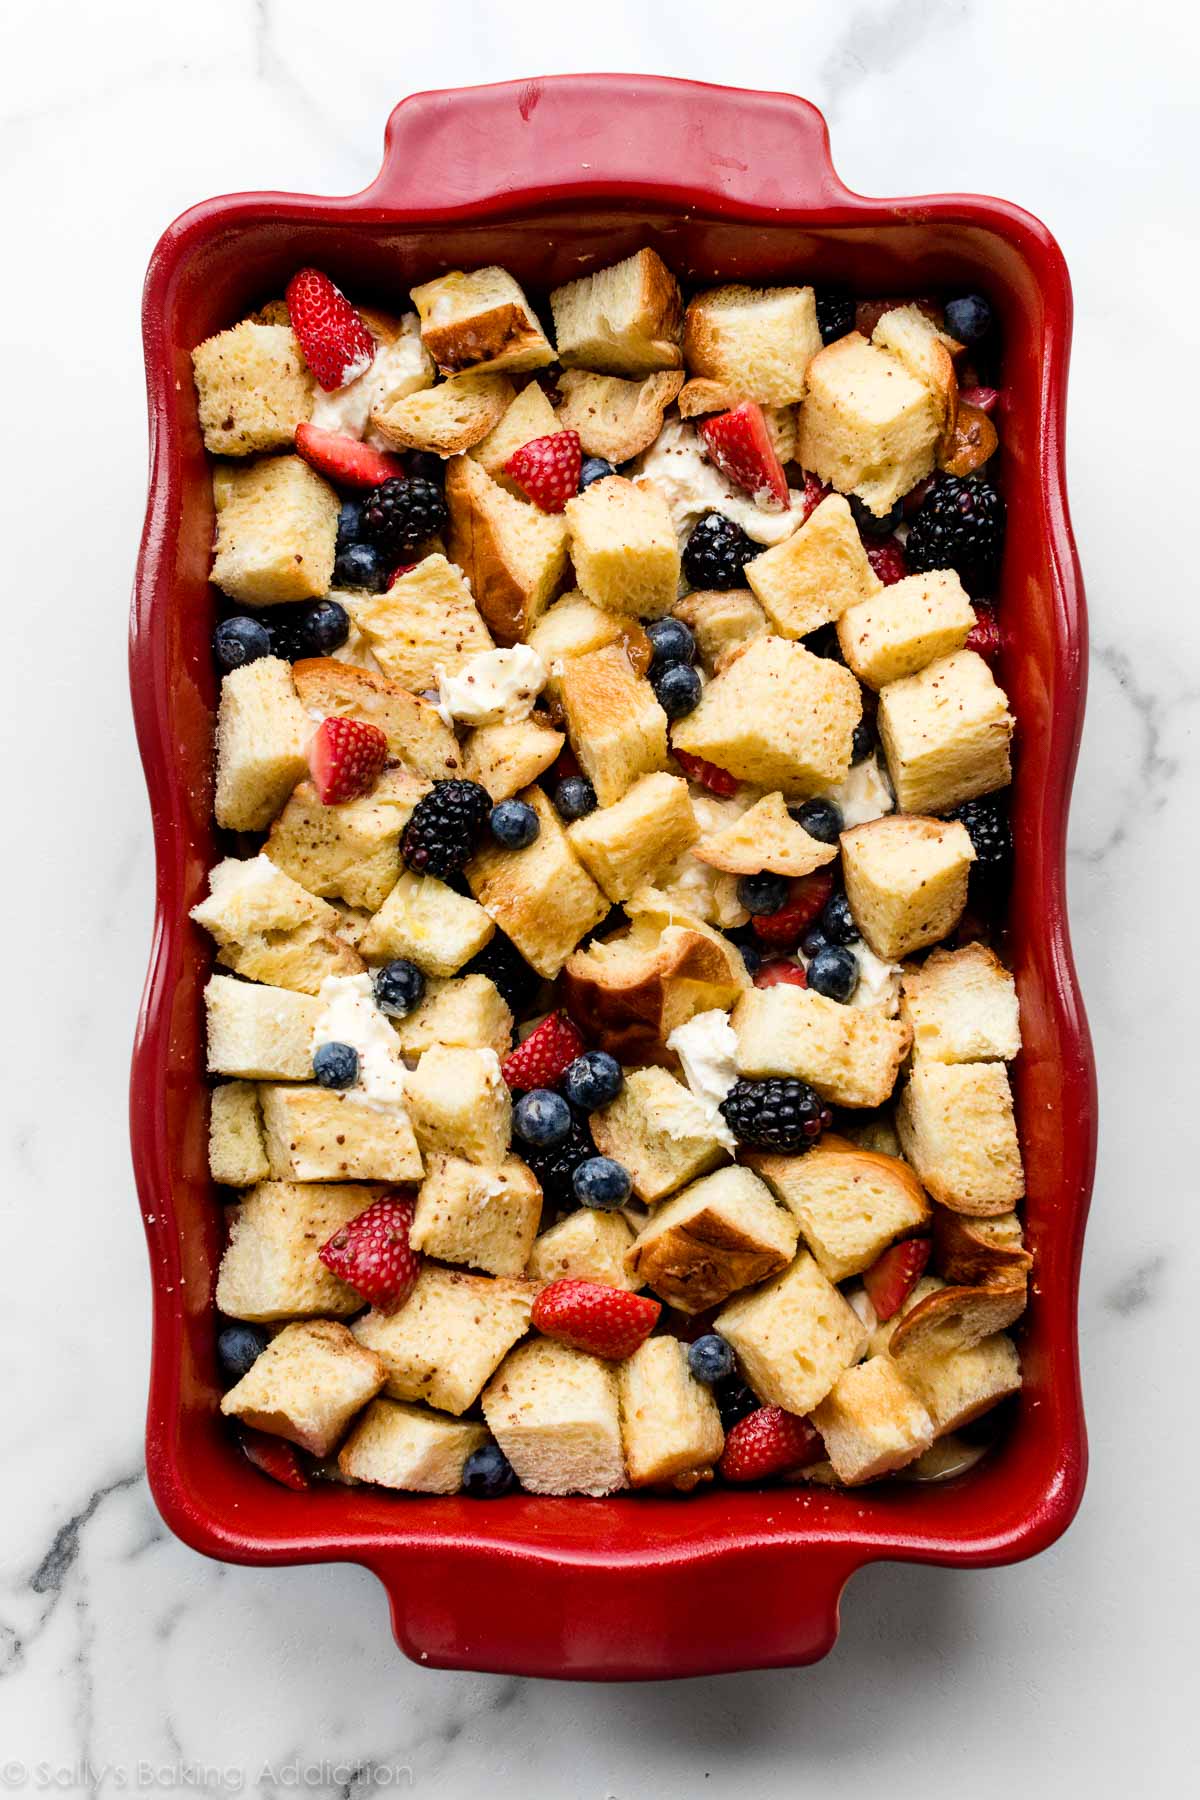 cubed challah bread, berries, and cream cheese mixture layered in red casserole dish